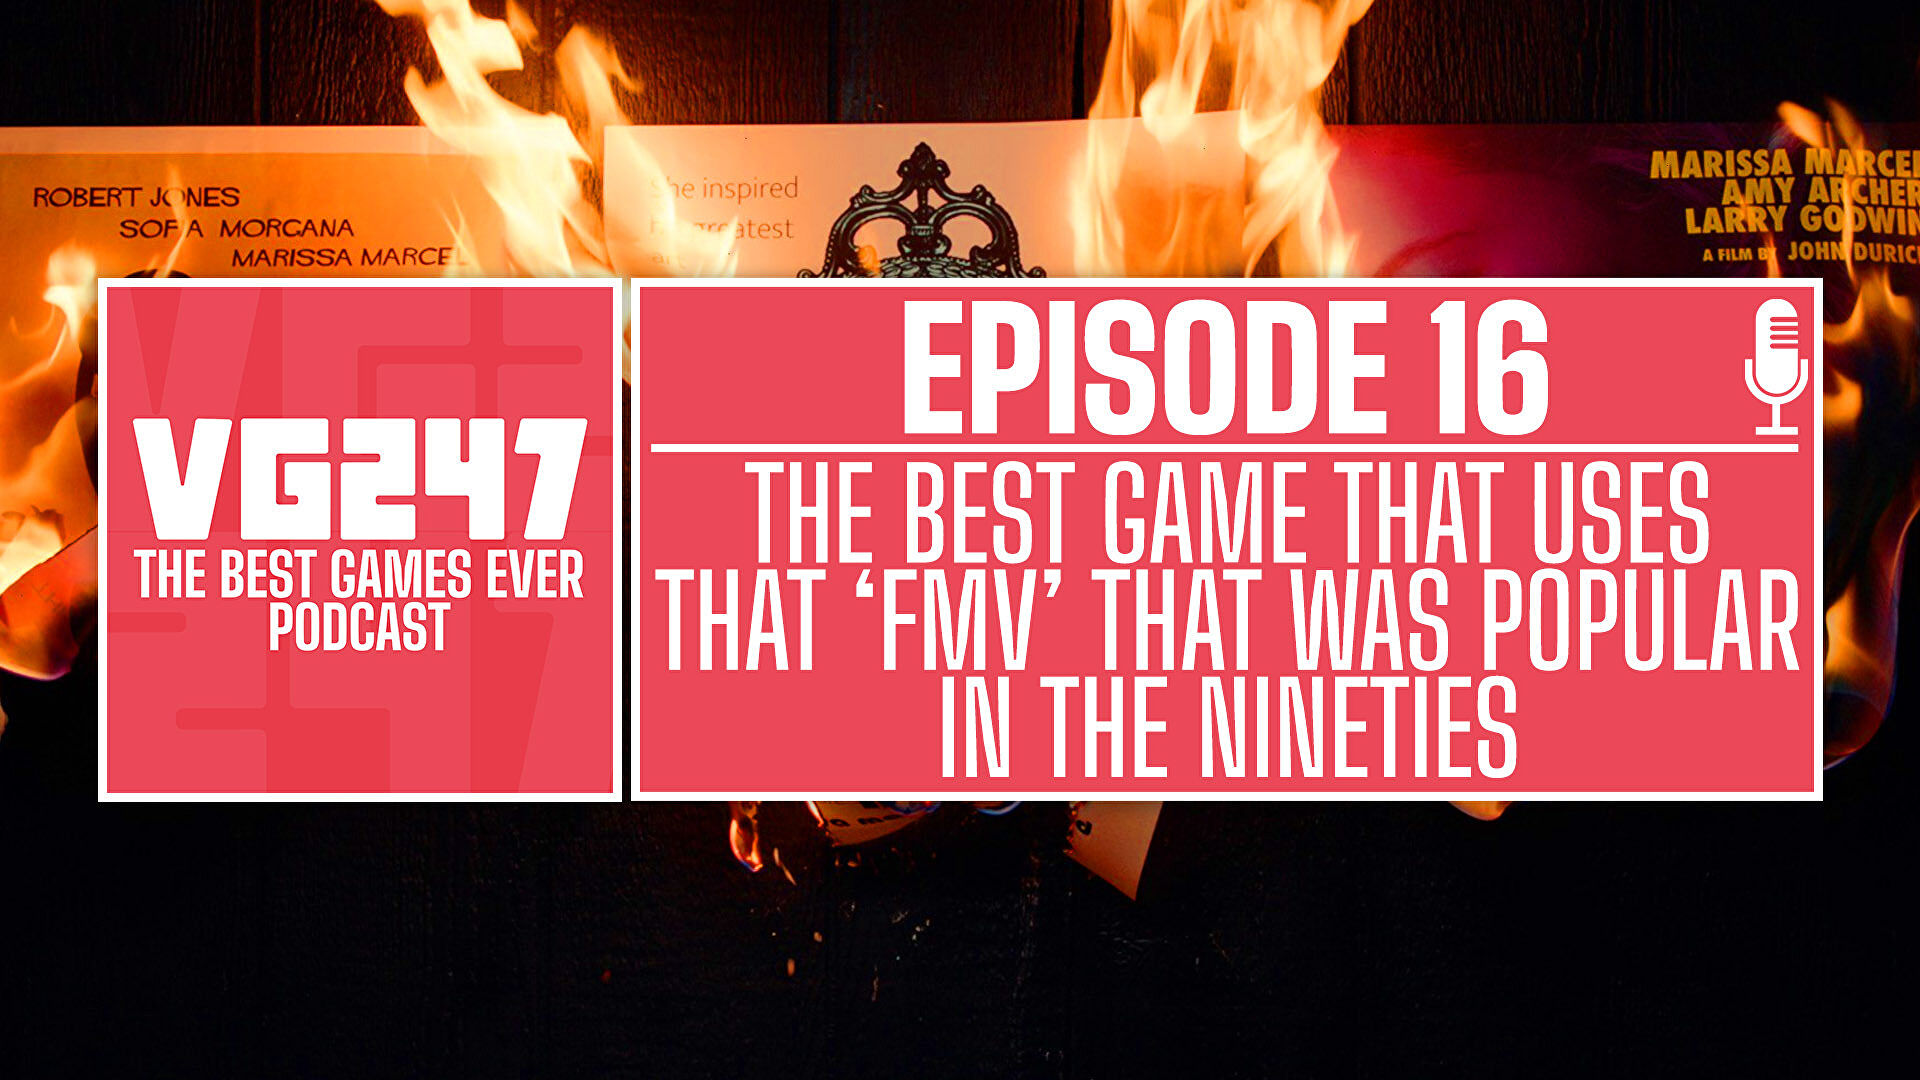 VG247’s The Best Games Ever Podcast – Ep.16: Best game that uses that FMV that was all the rage in the ’90s